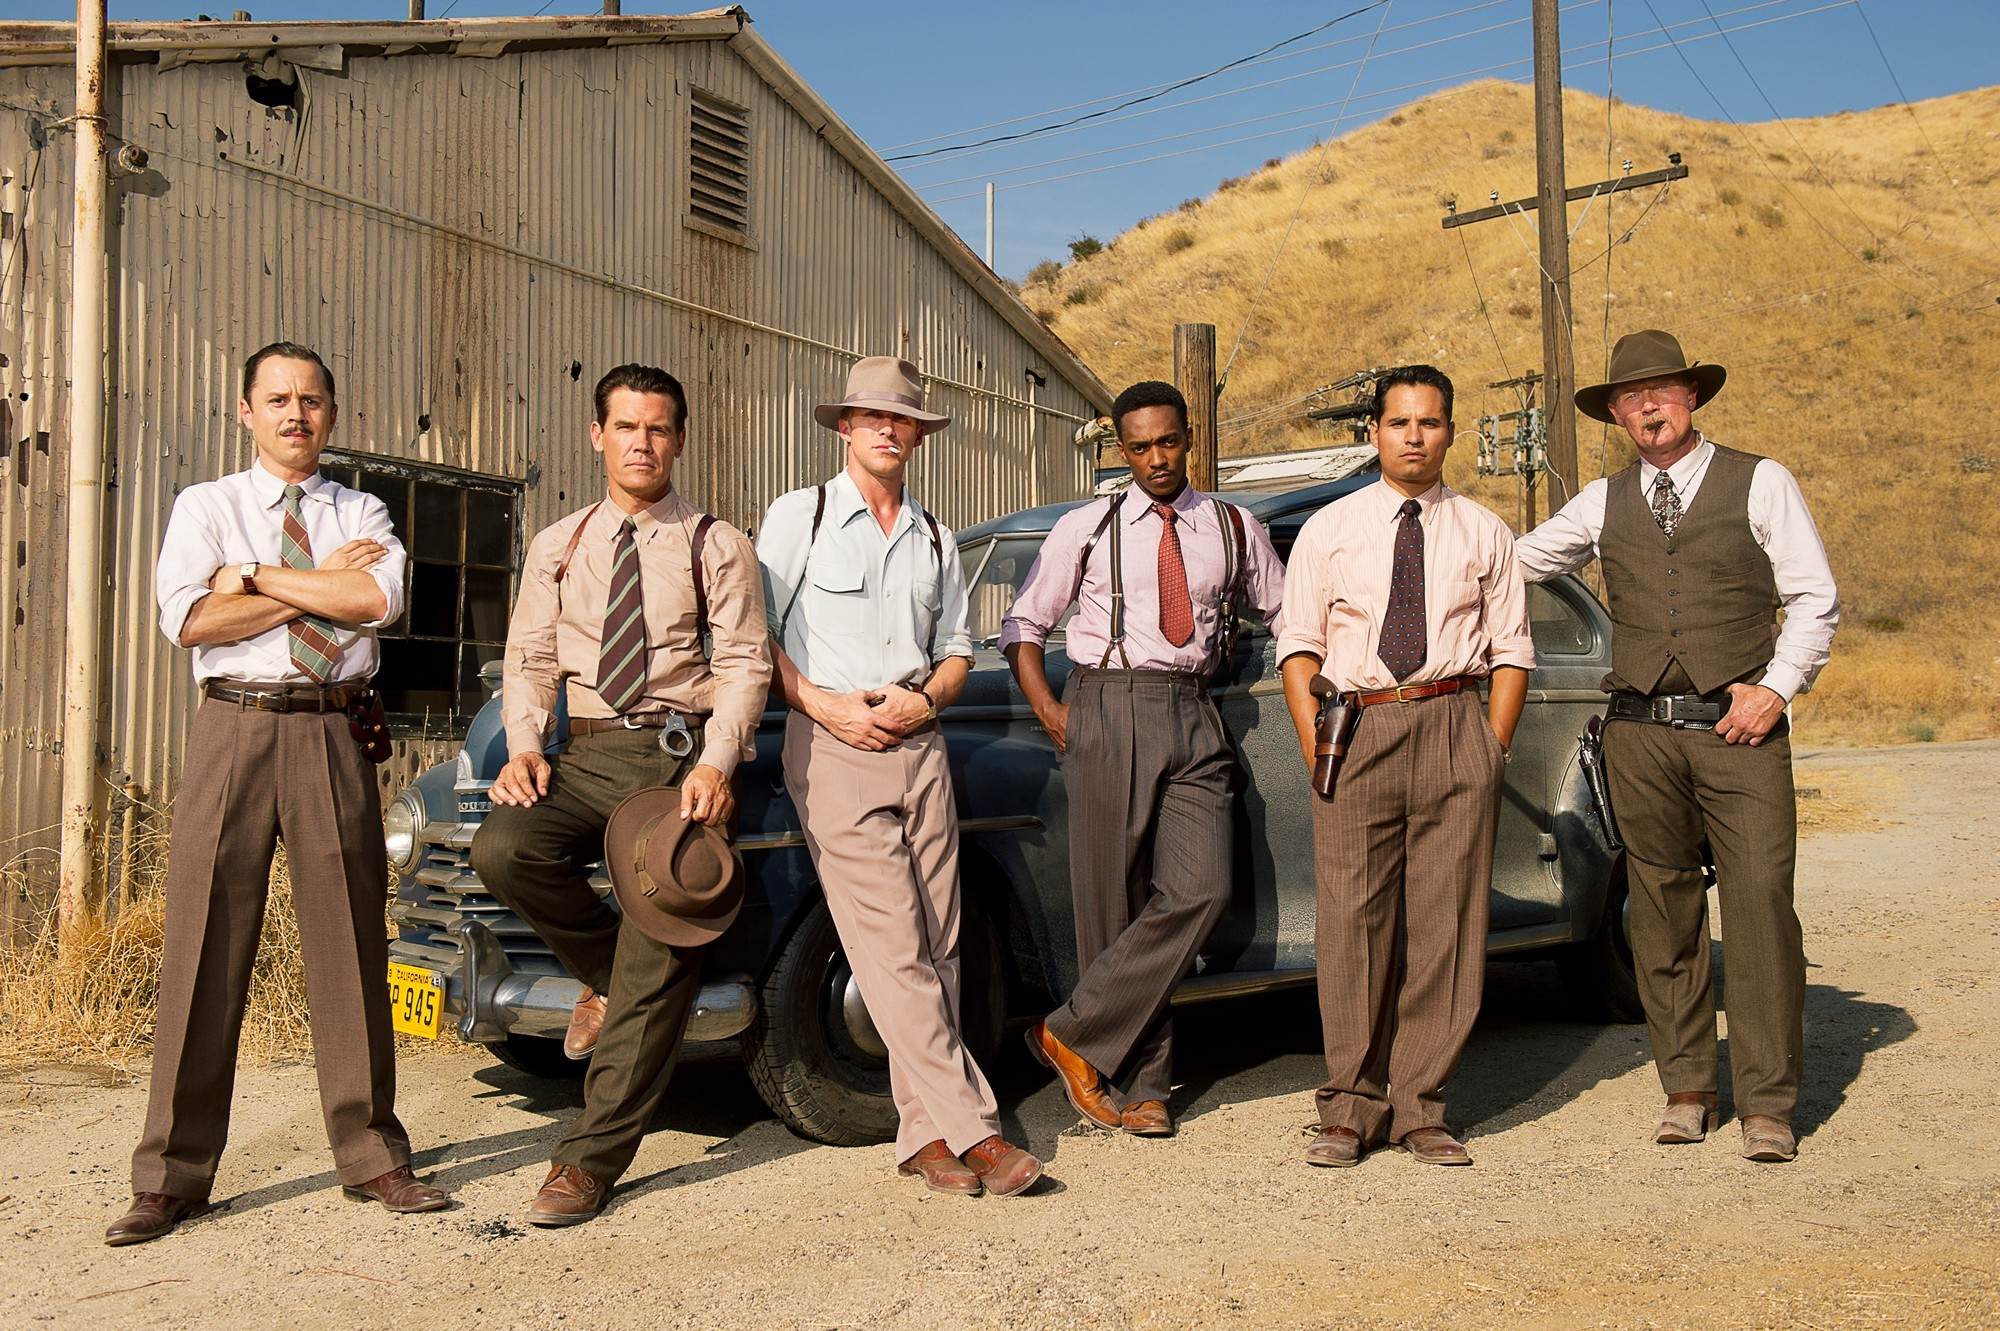 Giovanni Ribisi, Josh Brolin, Ryan Gosling, Anthony Mackie, Michael Pena and Robert Patrick in Warner Bros. Pictures' Gangster Squad (2013)